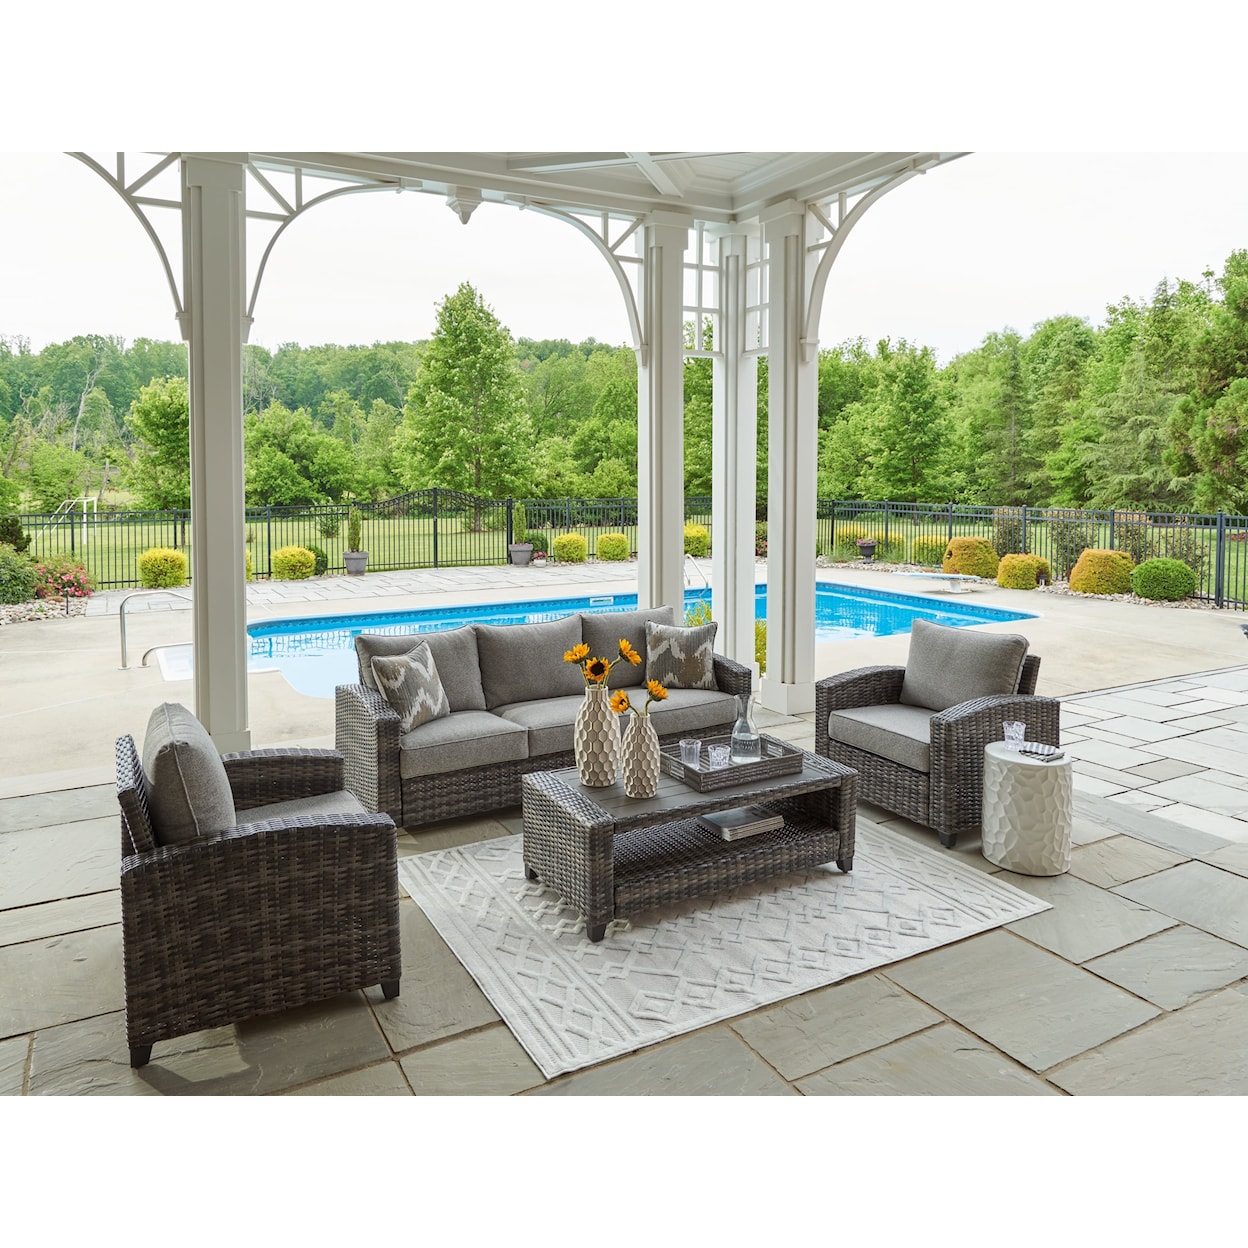 Ashley Signature Design Oasis Court Outdoor Sofa/Chairs/Table Set (Set of 4)